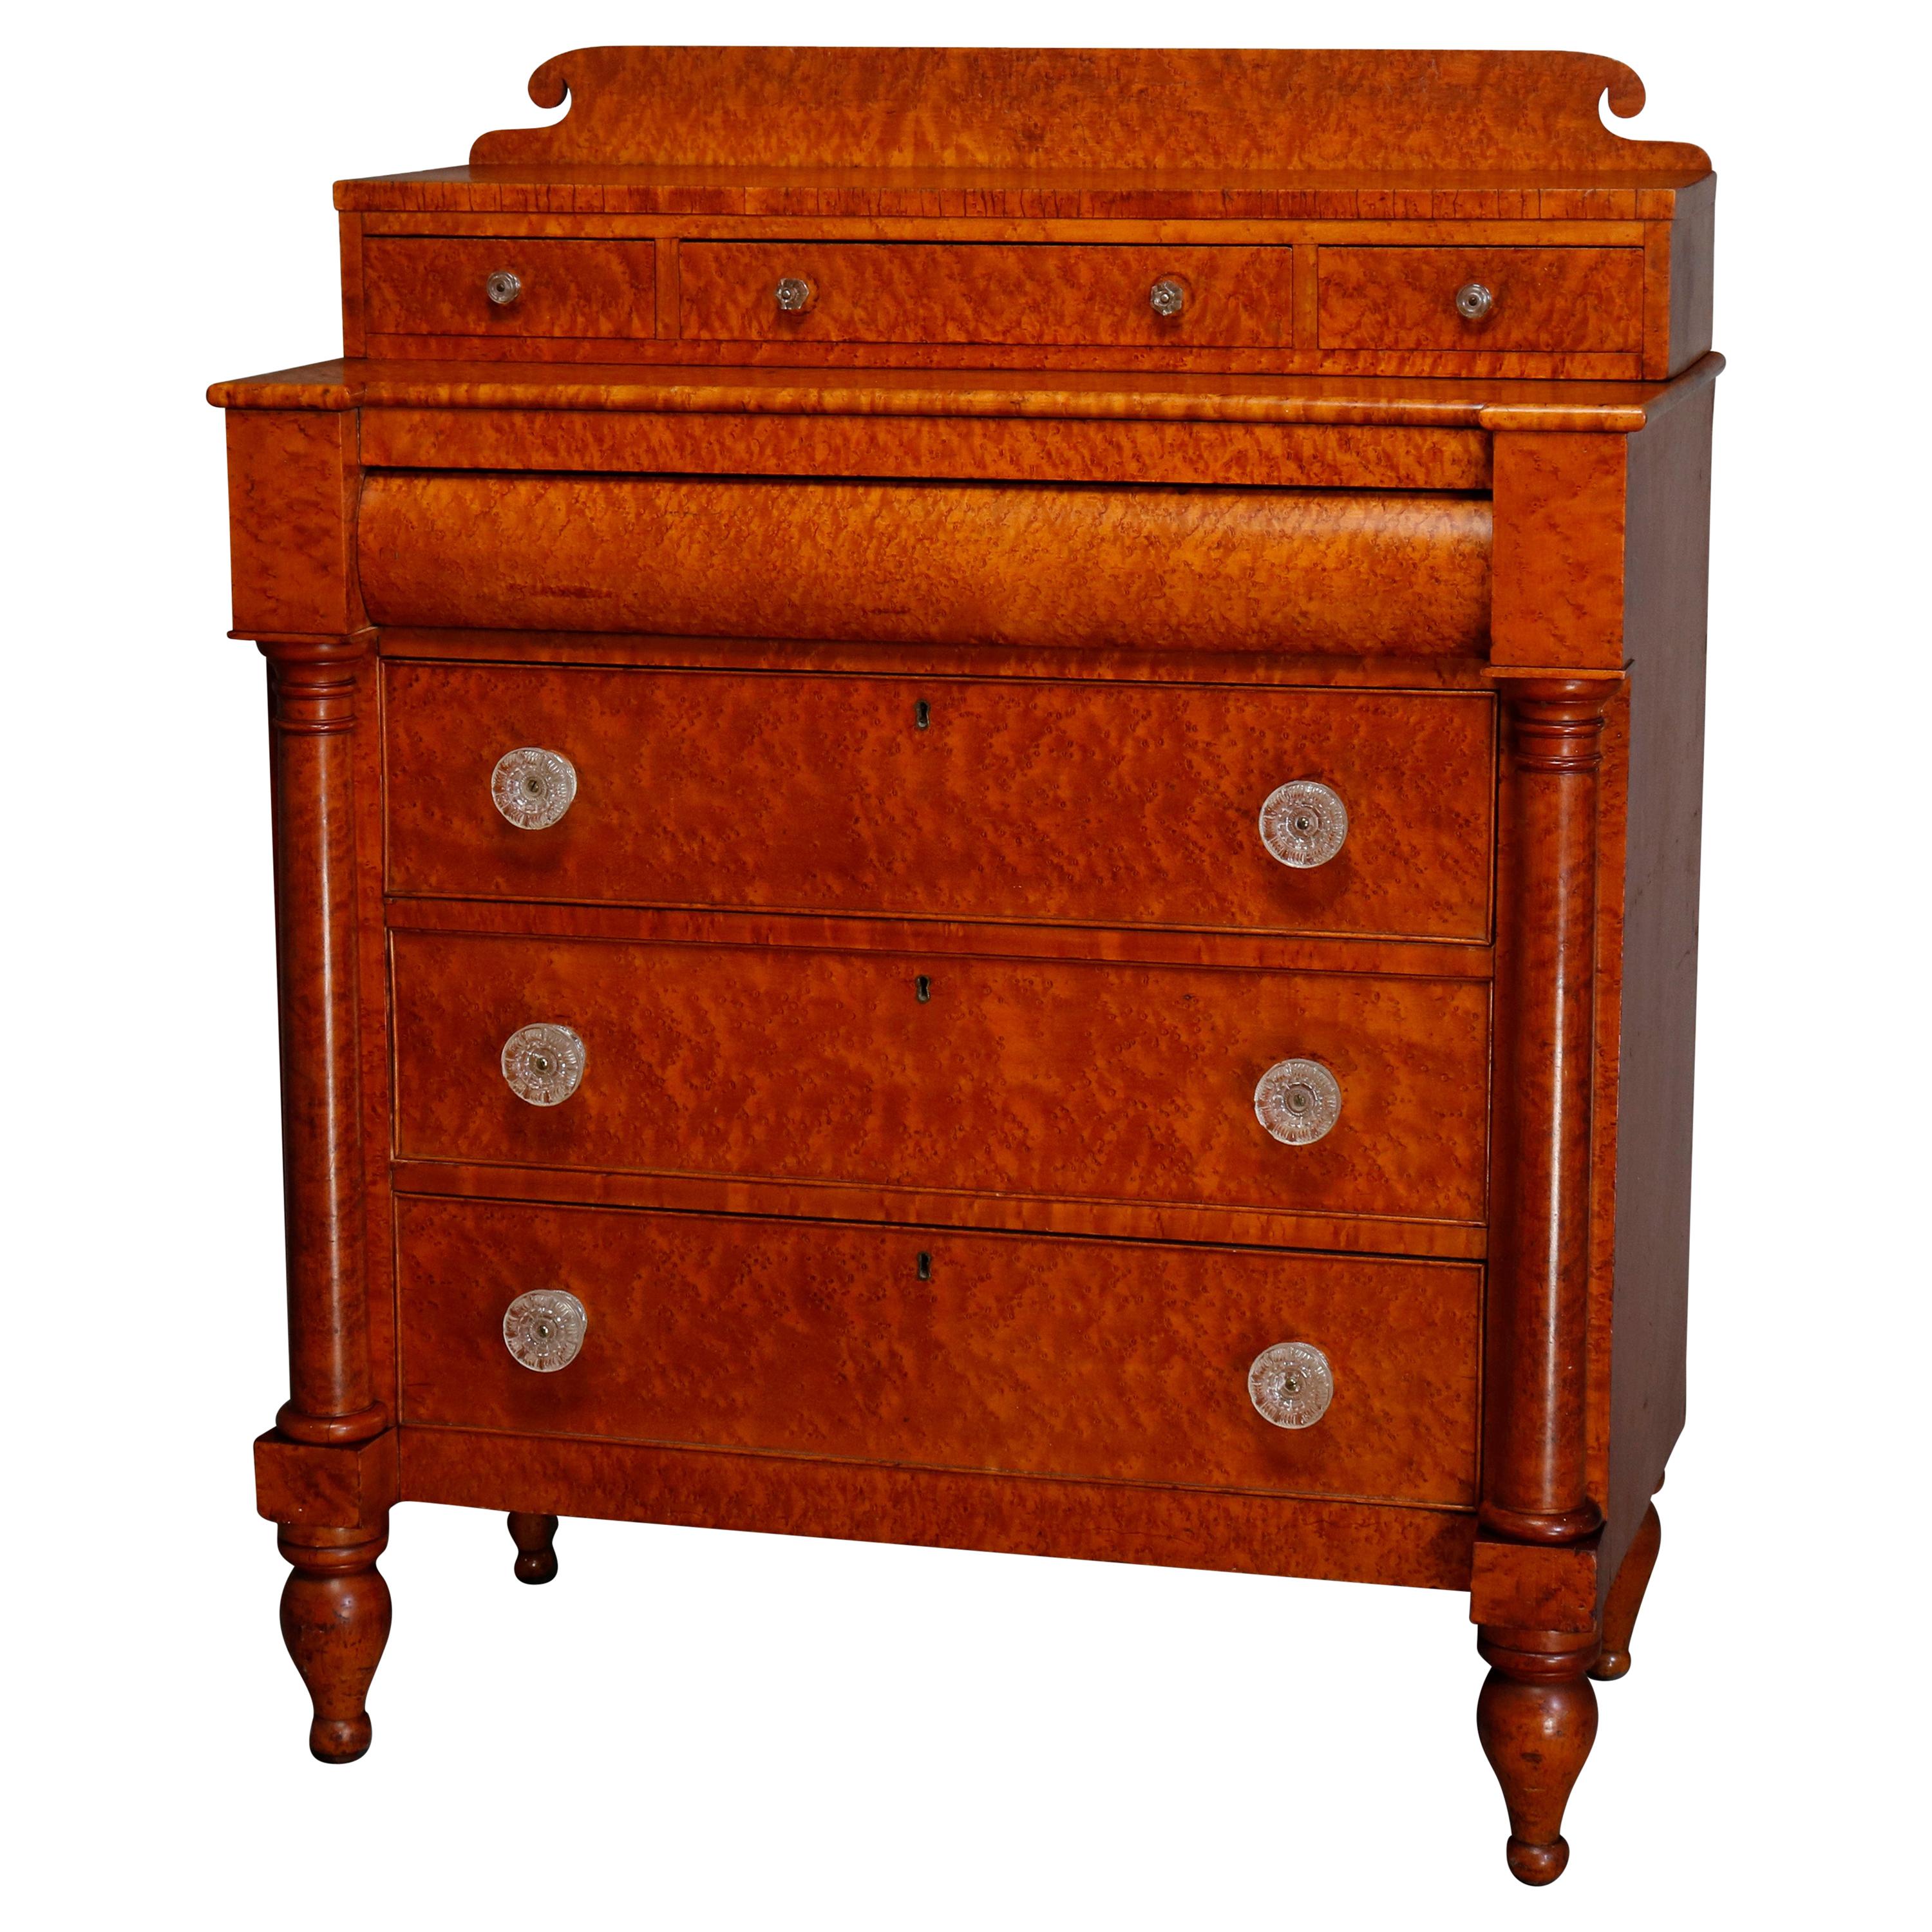 Antique Transitional Empire to Sheraton Birdseye Maple Chest of Drawers